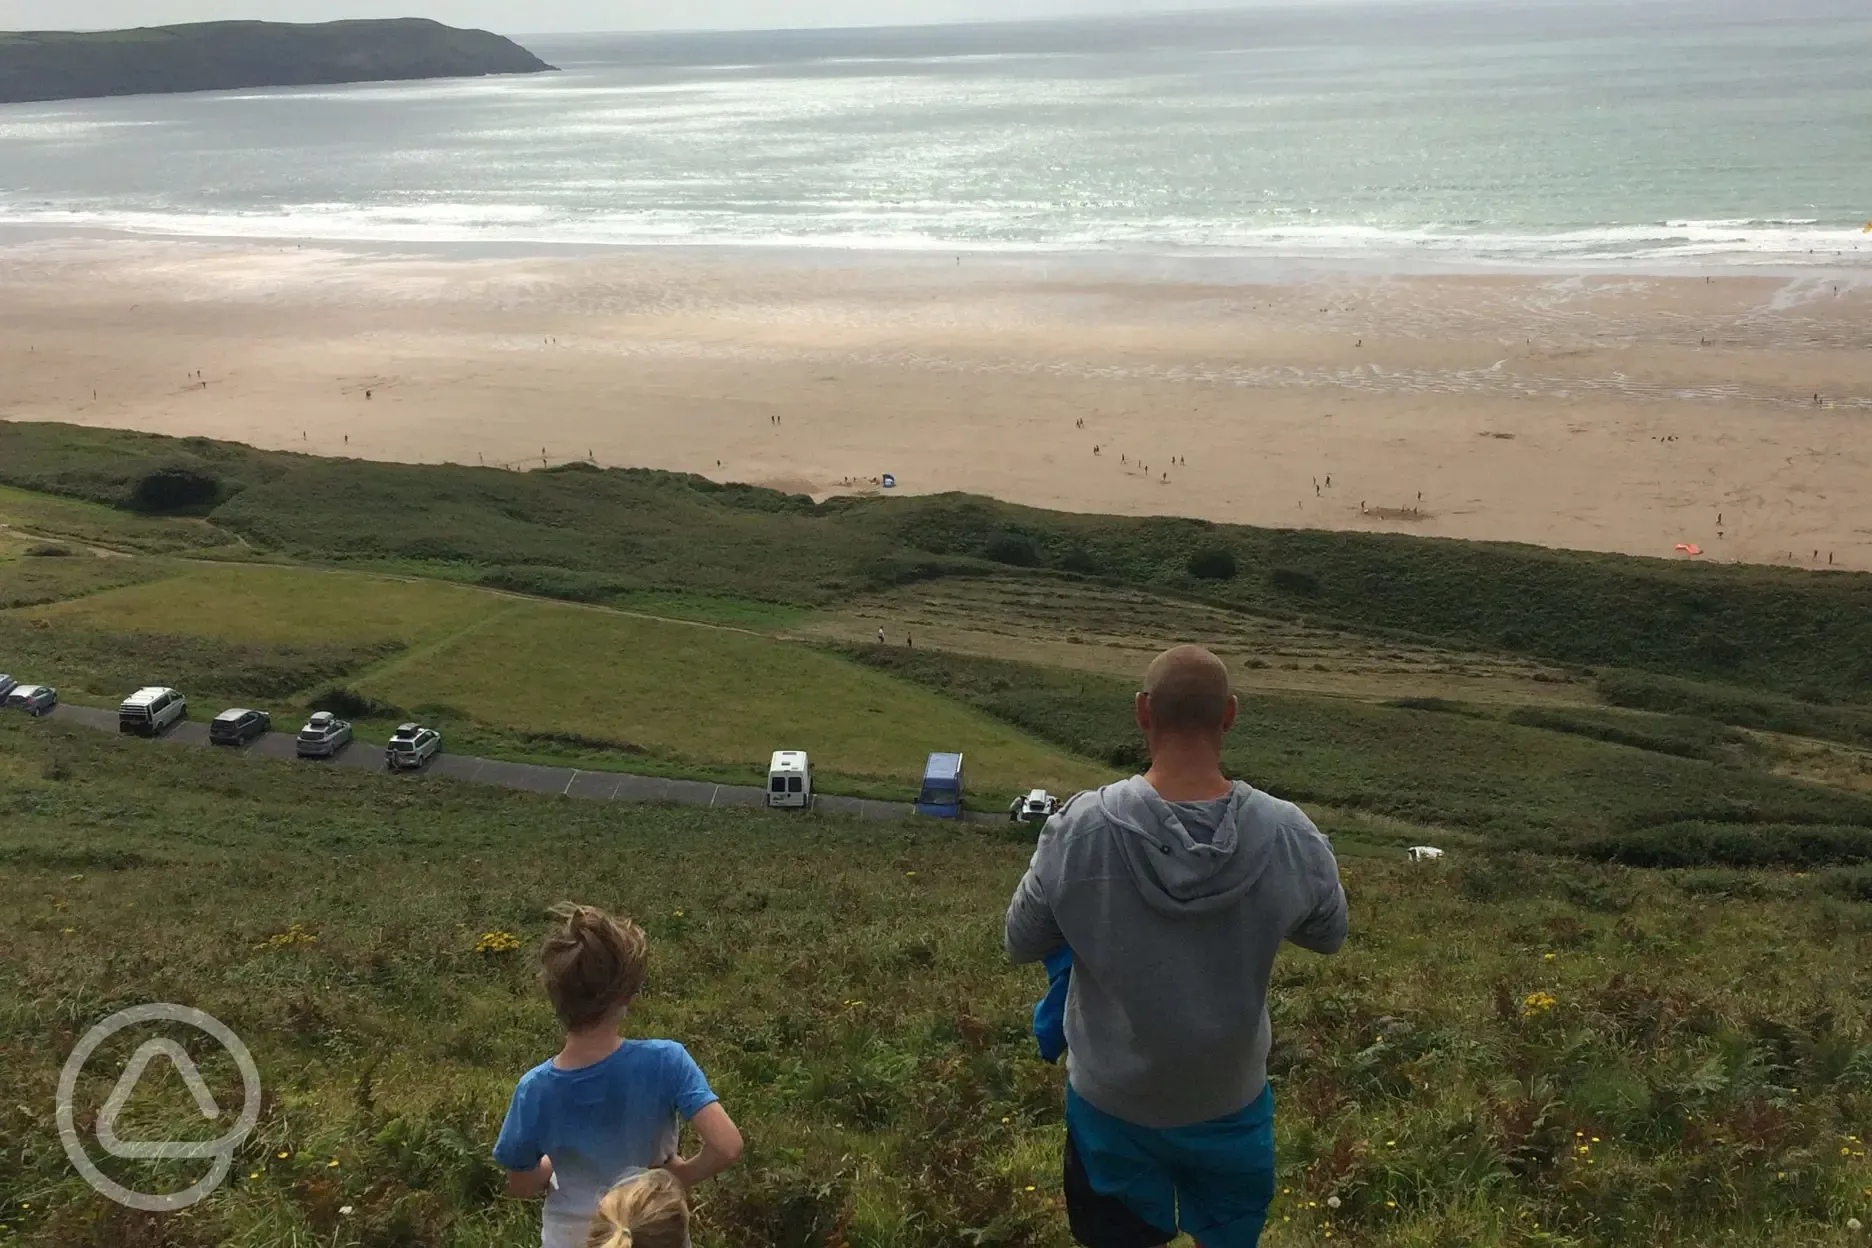 Families at Woolacombe beach